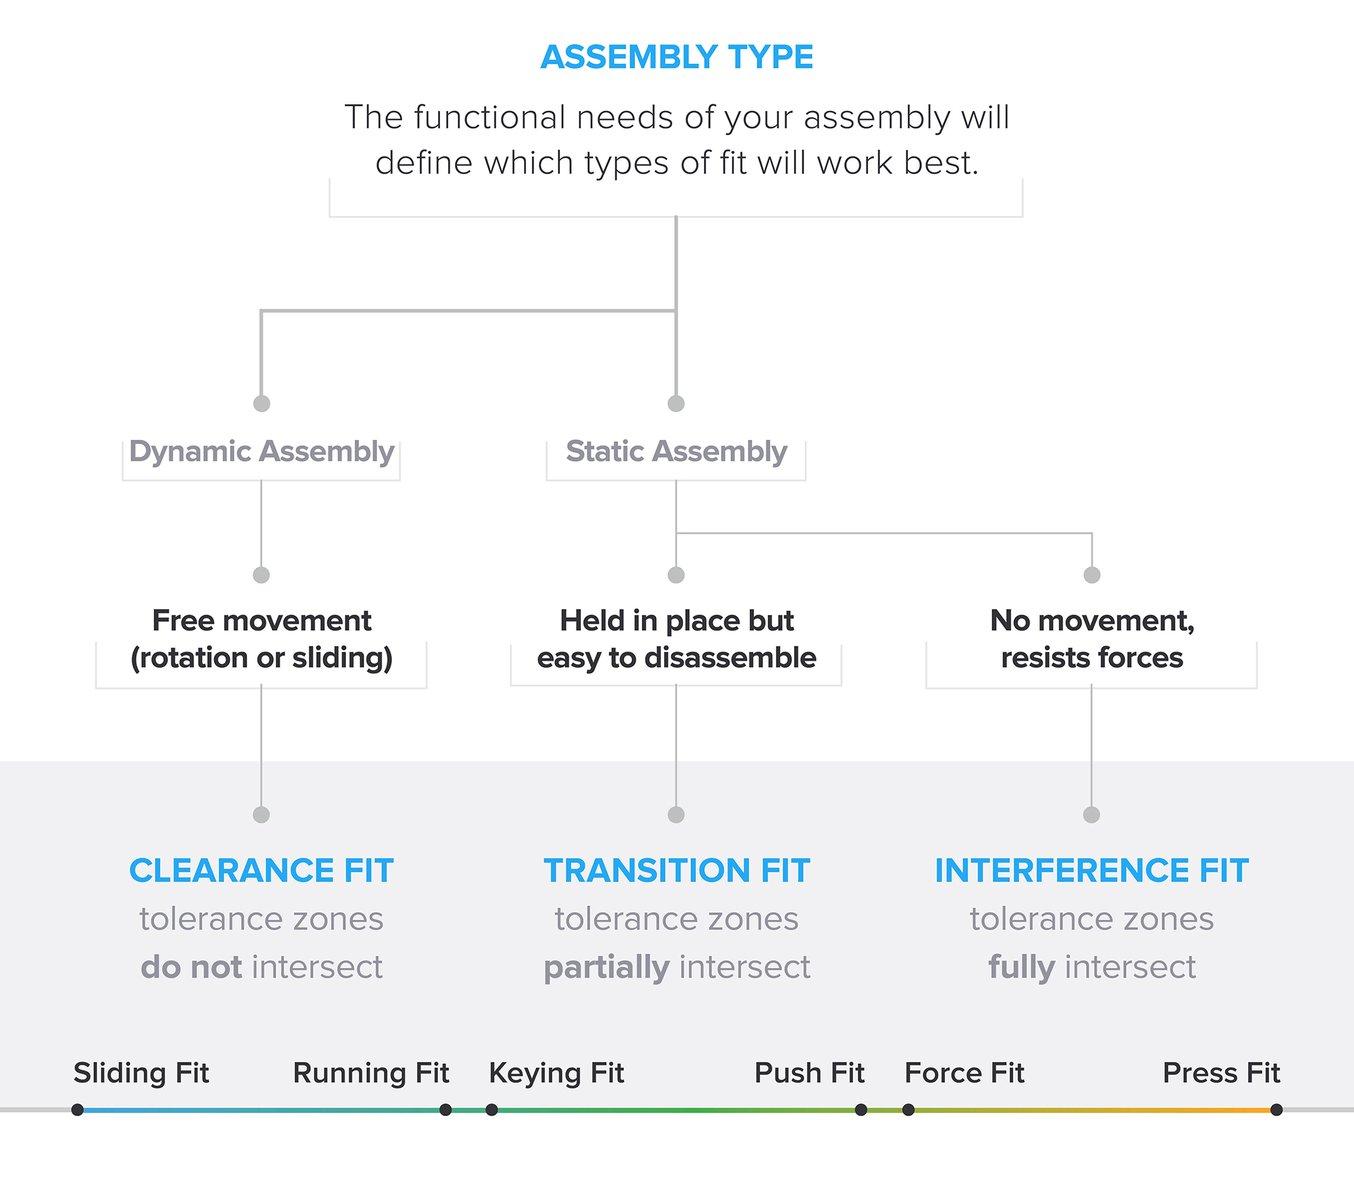 Limits & Fits, Types of Fits Explained & Tolerance Charts